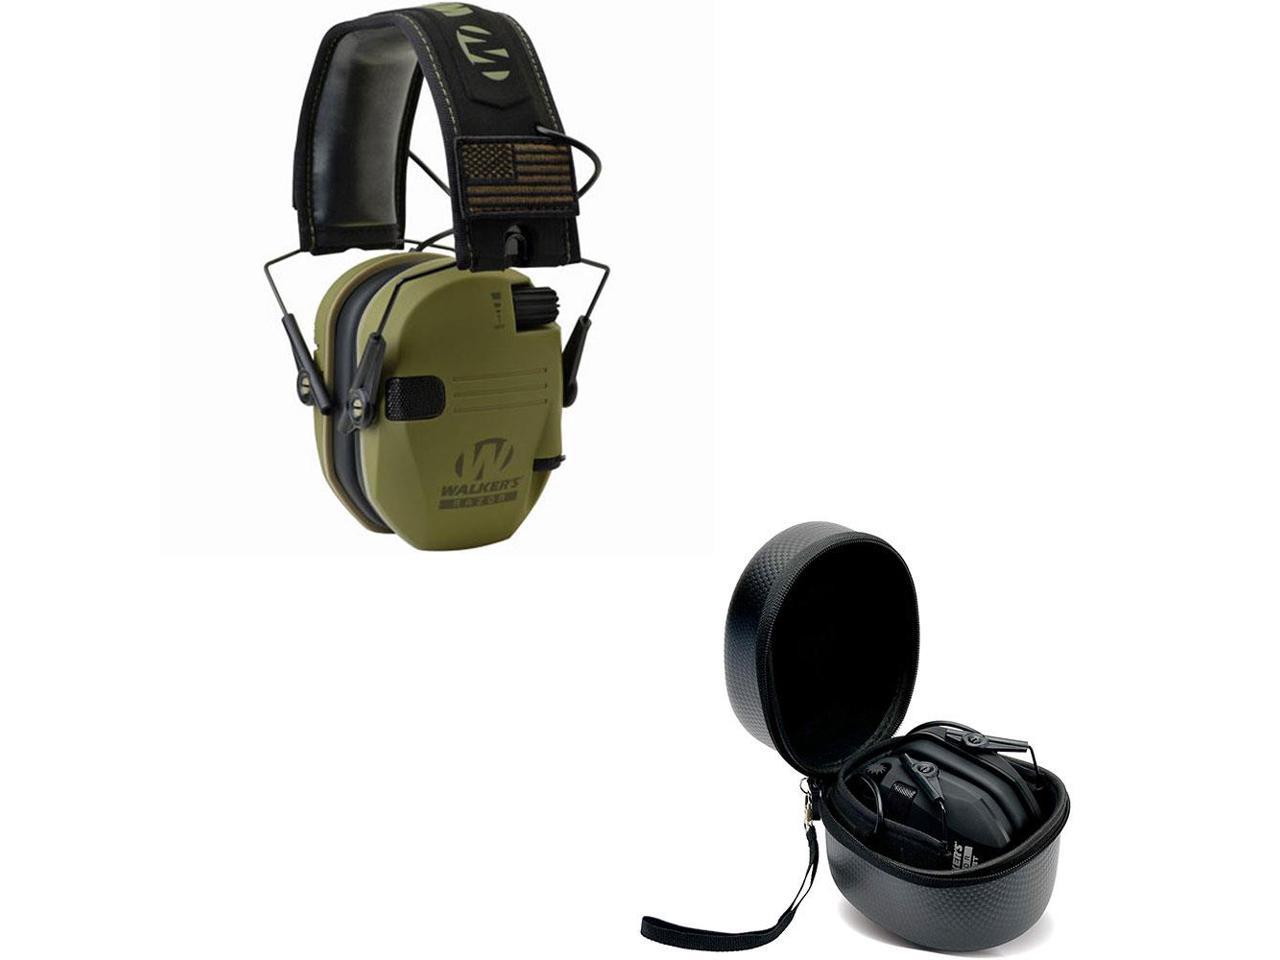 Walker's Razor Slim Patriot Series Shooting Ear Protection Muff w/ Carrying Case